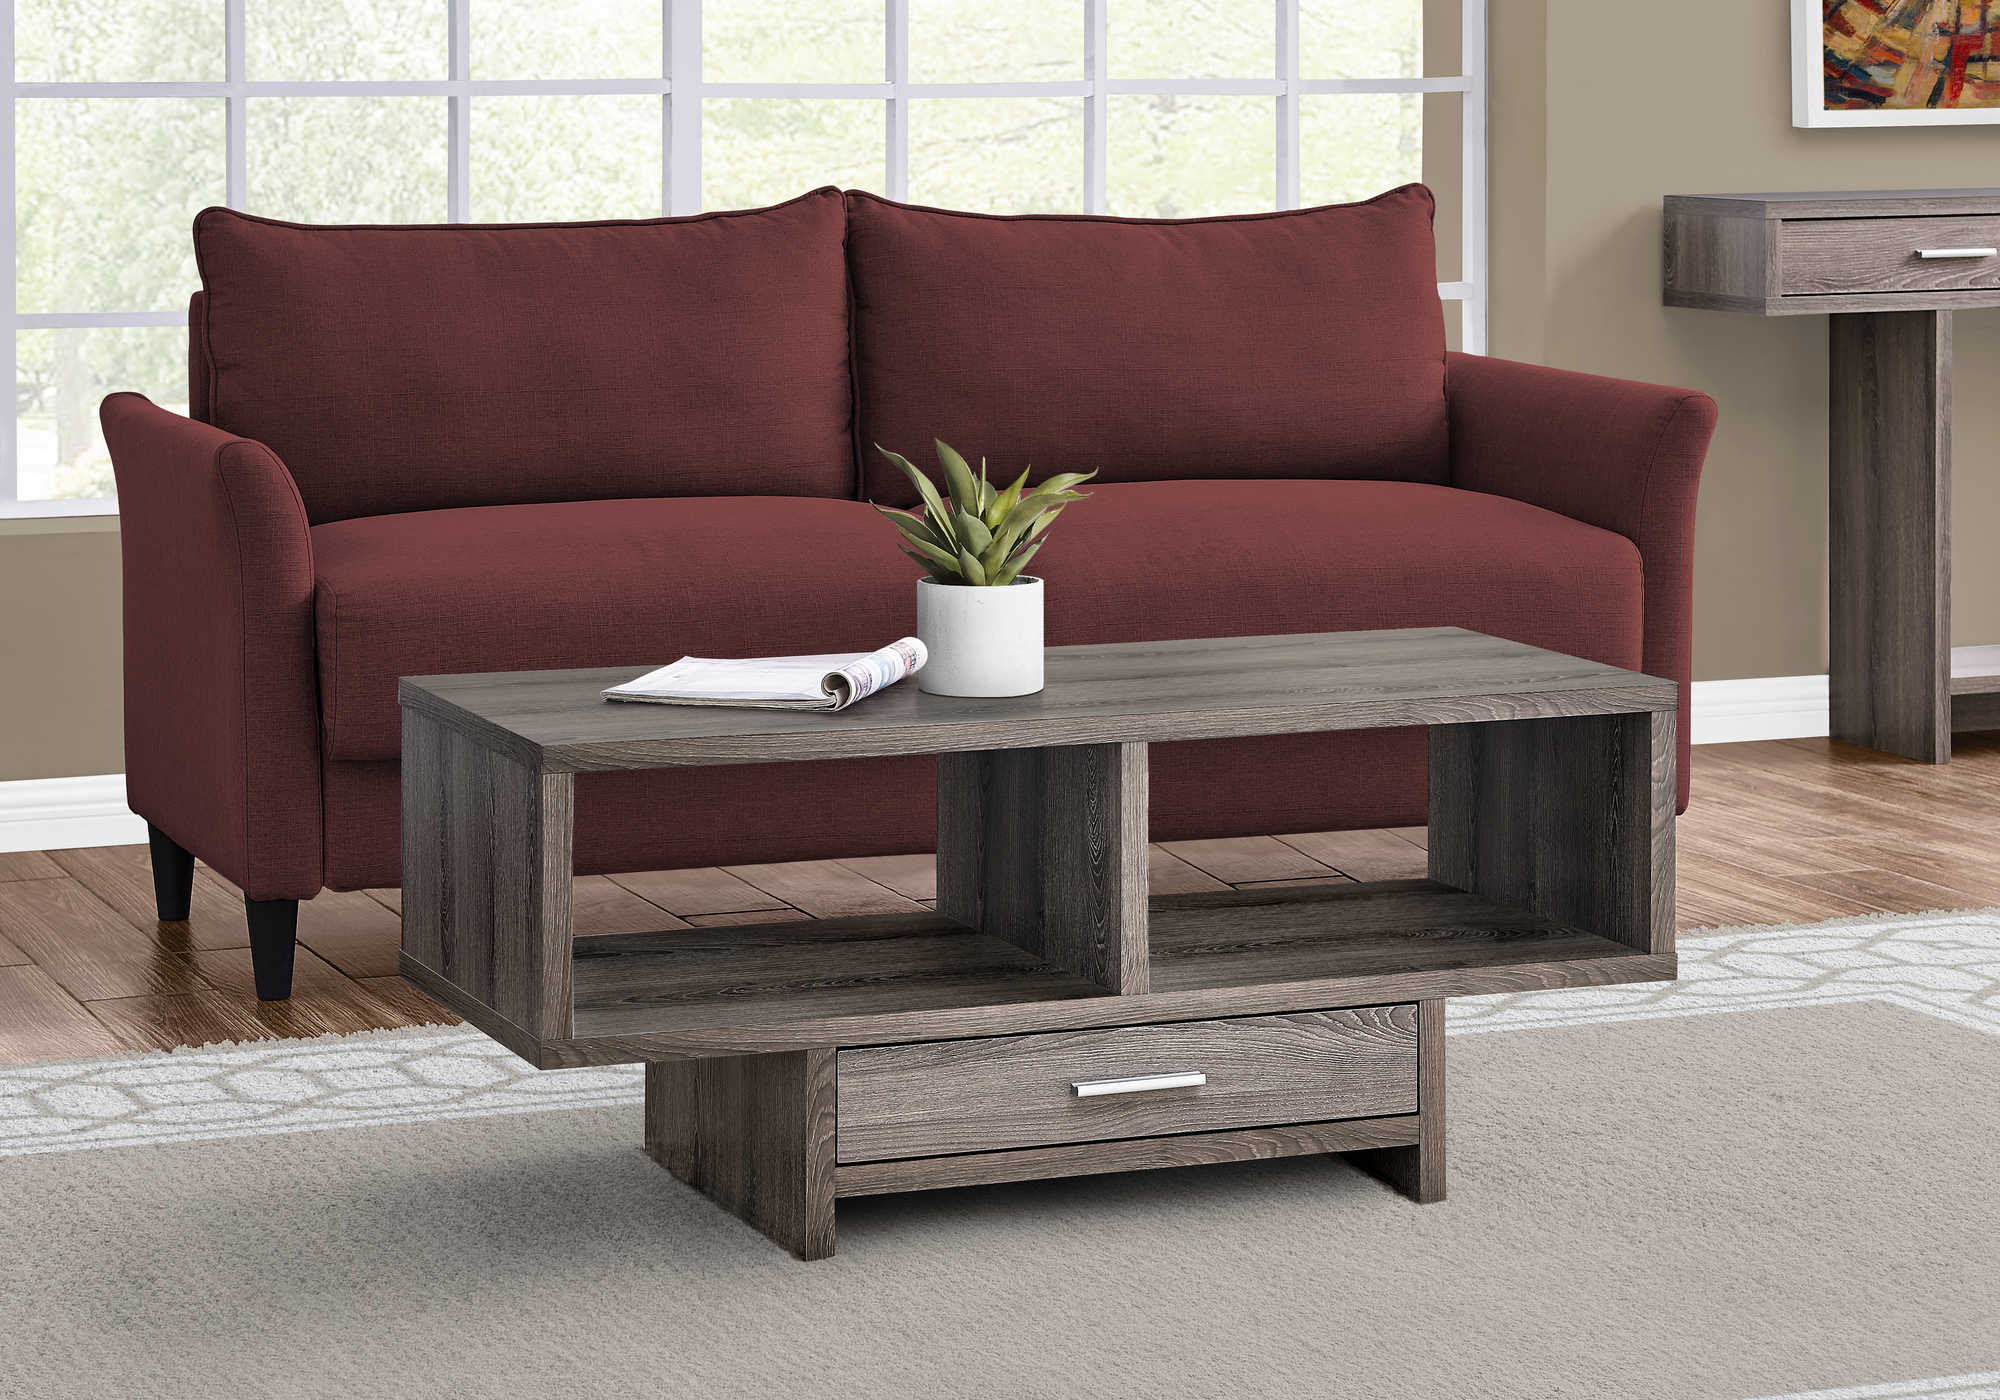 COFFEE TABLE - DARK TAUPE WITH STORAGE